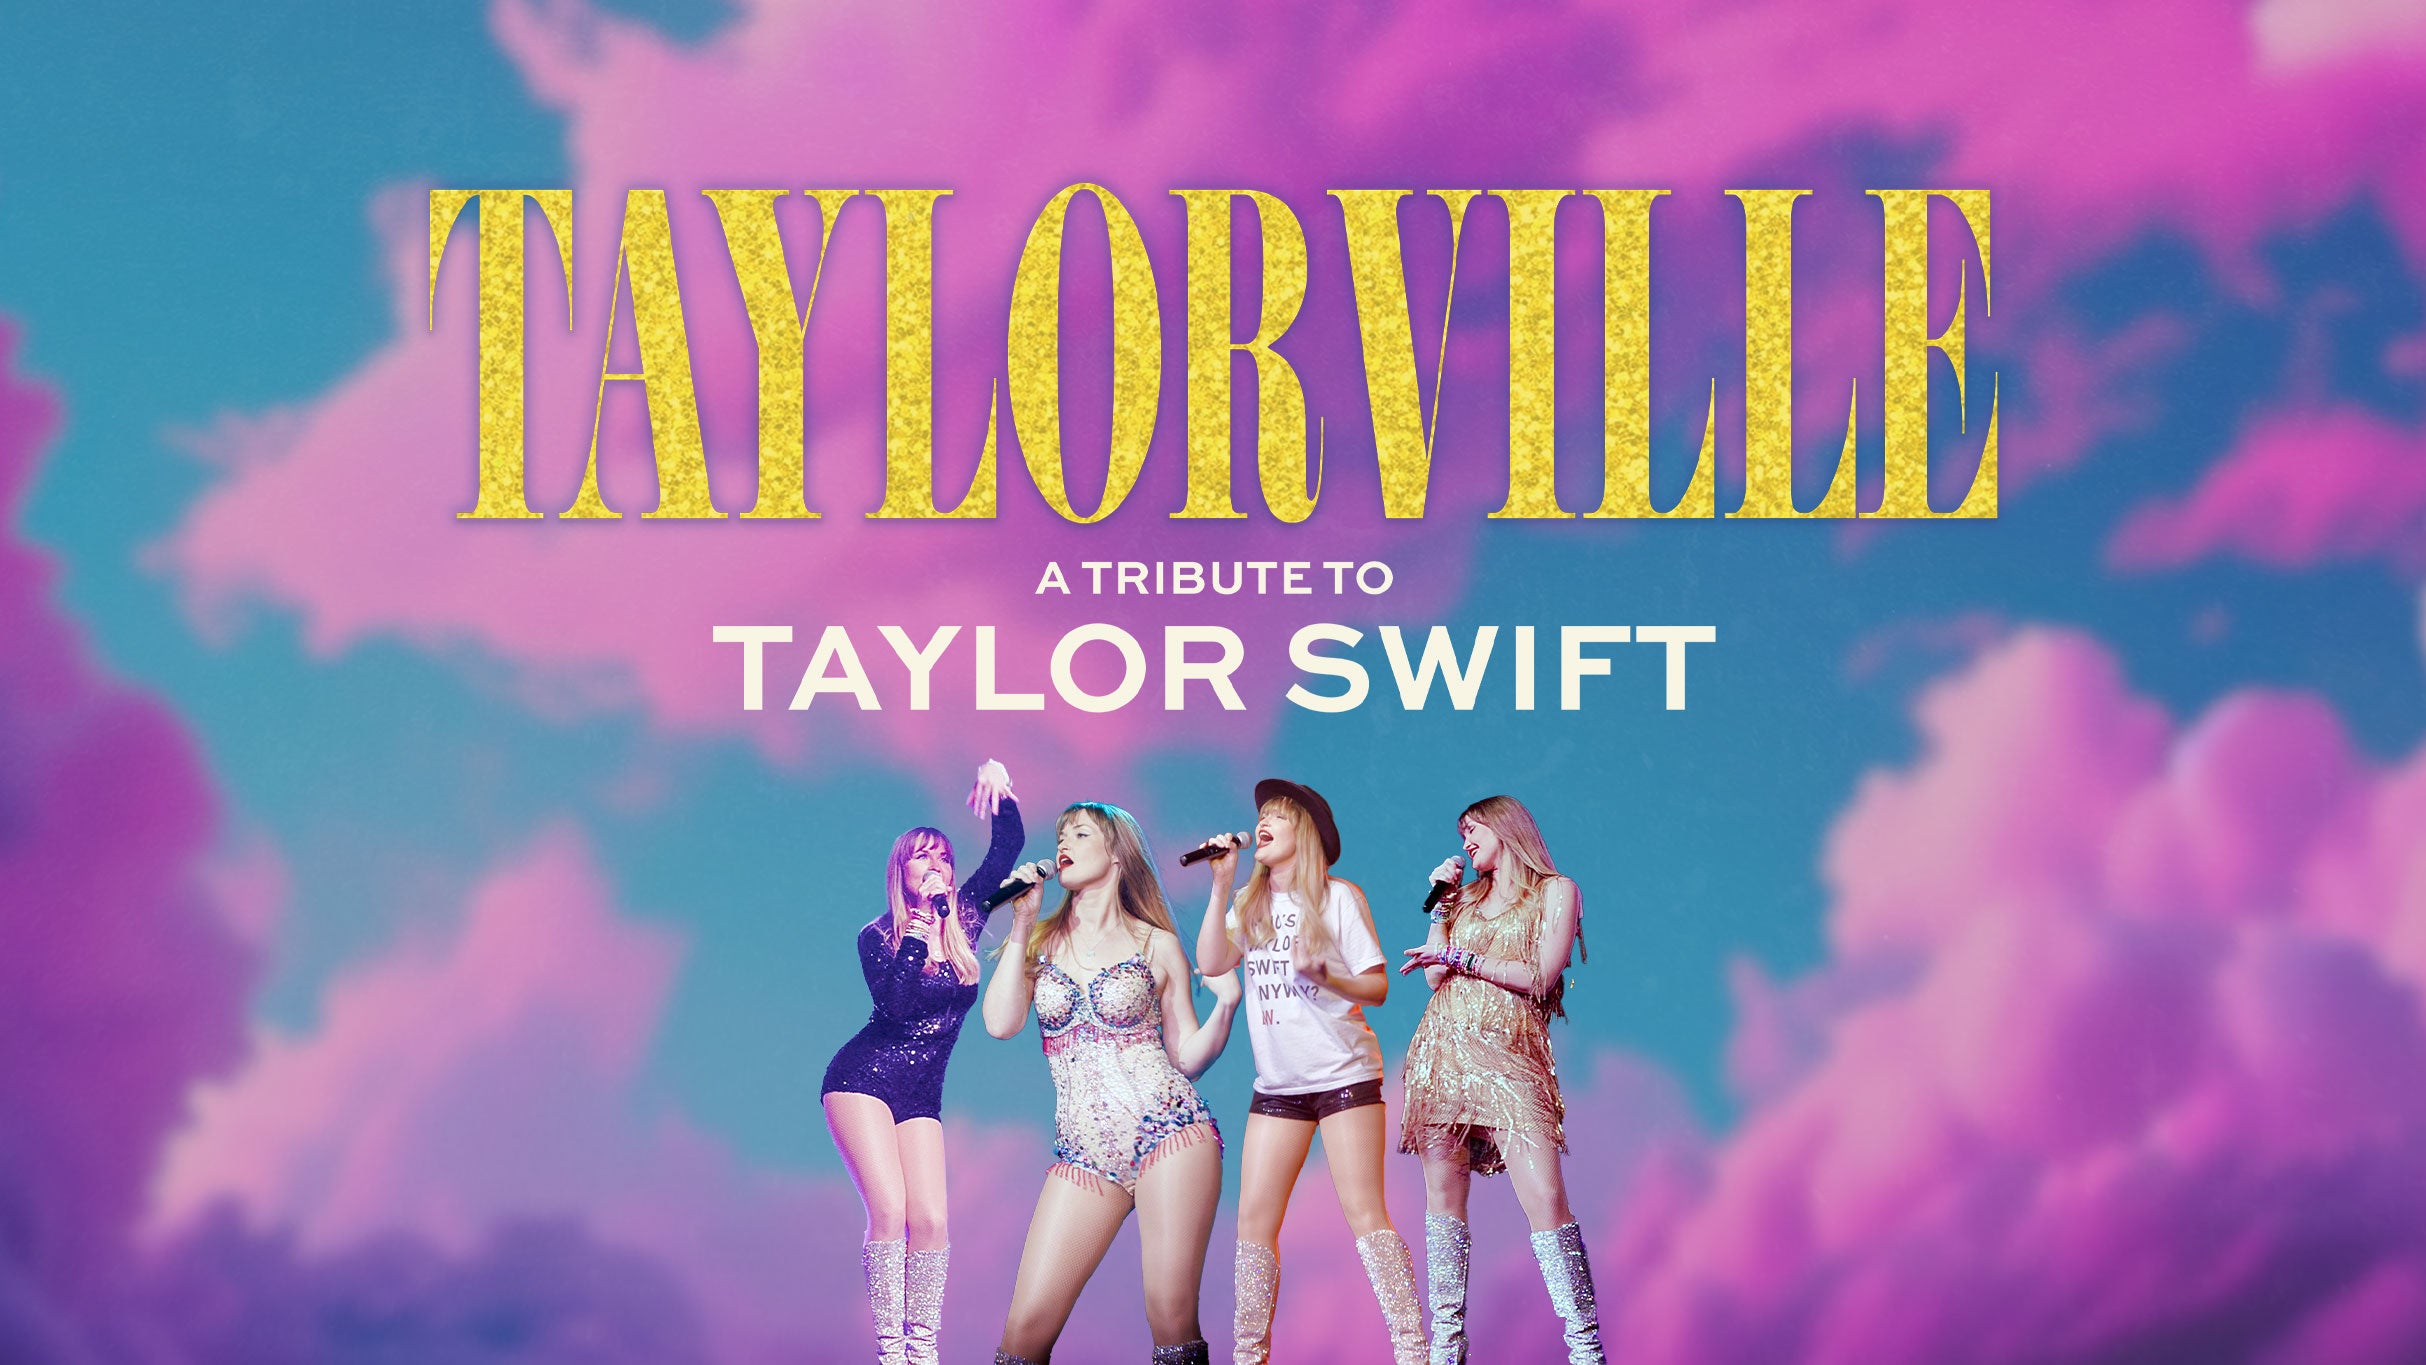 Taylorville - A Tribute to Taylor Swift - Special Matinee Performance presale information on freepresalepasswords.com